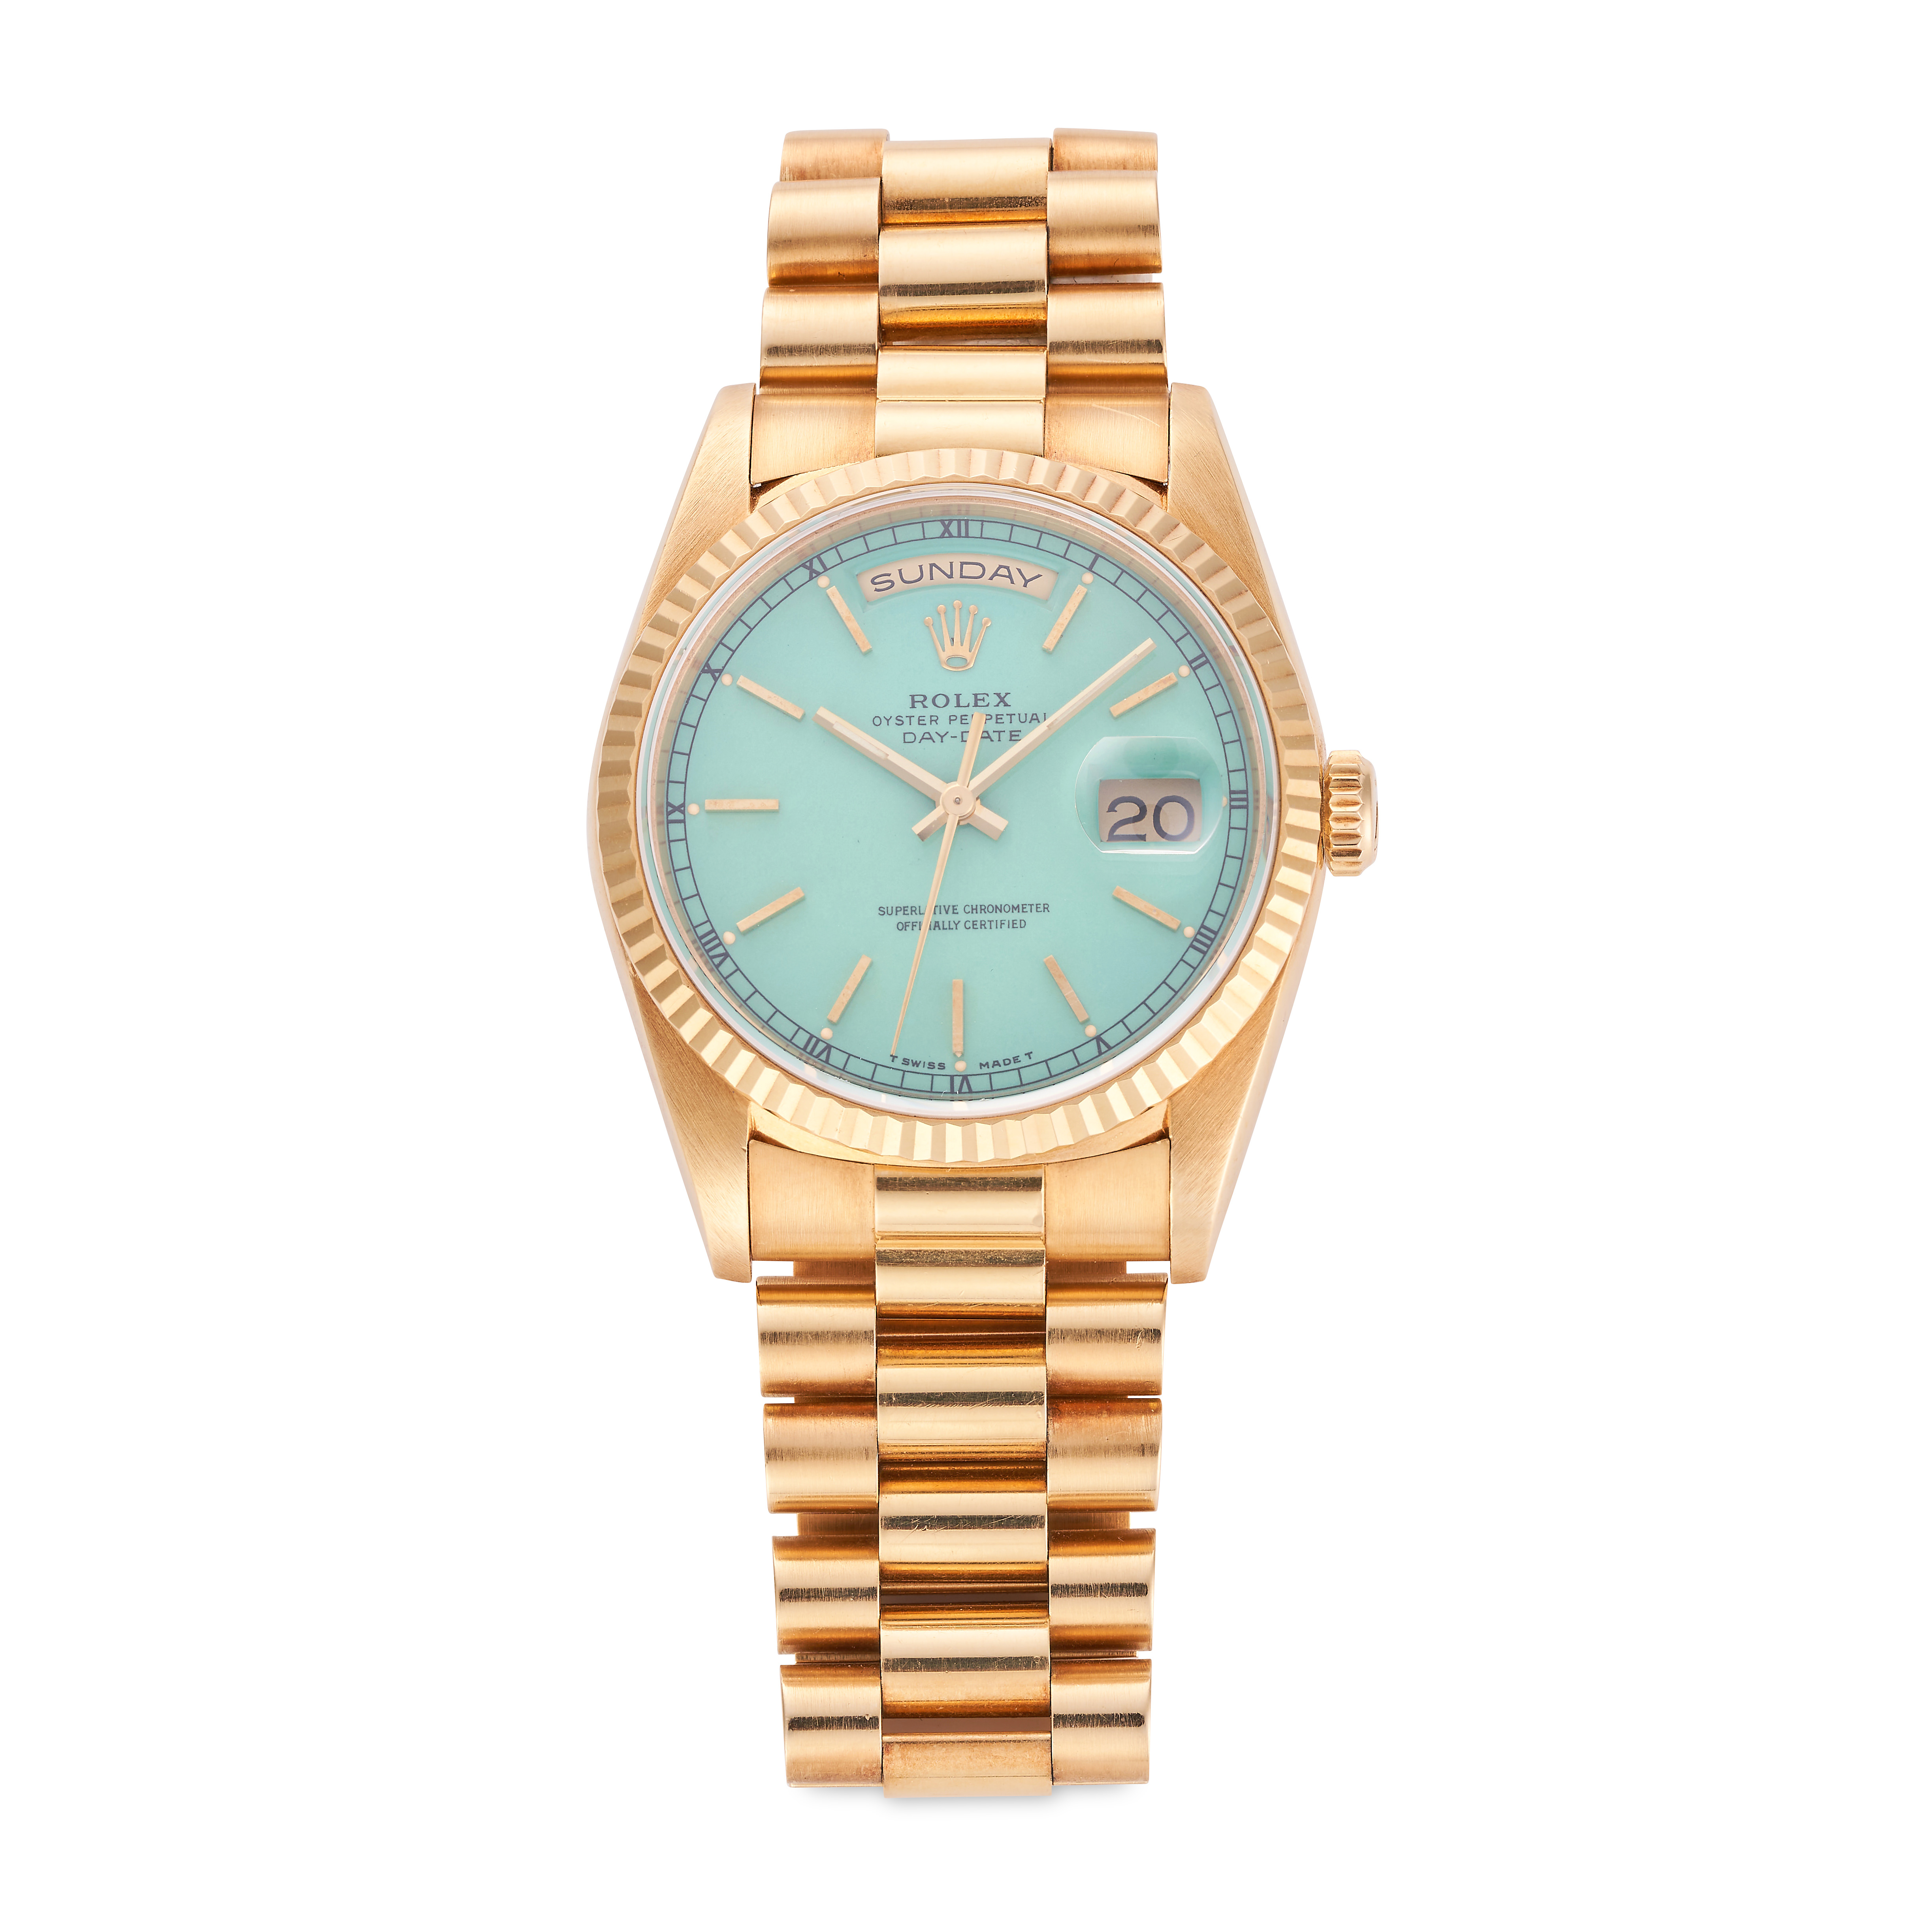 ROLEX, A DAY-DATE 36 WRISTWATCH in 18ct yellow gold, ref. 18238, E9XXXXX, circa 1990, gold fluted...